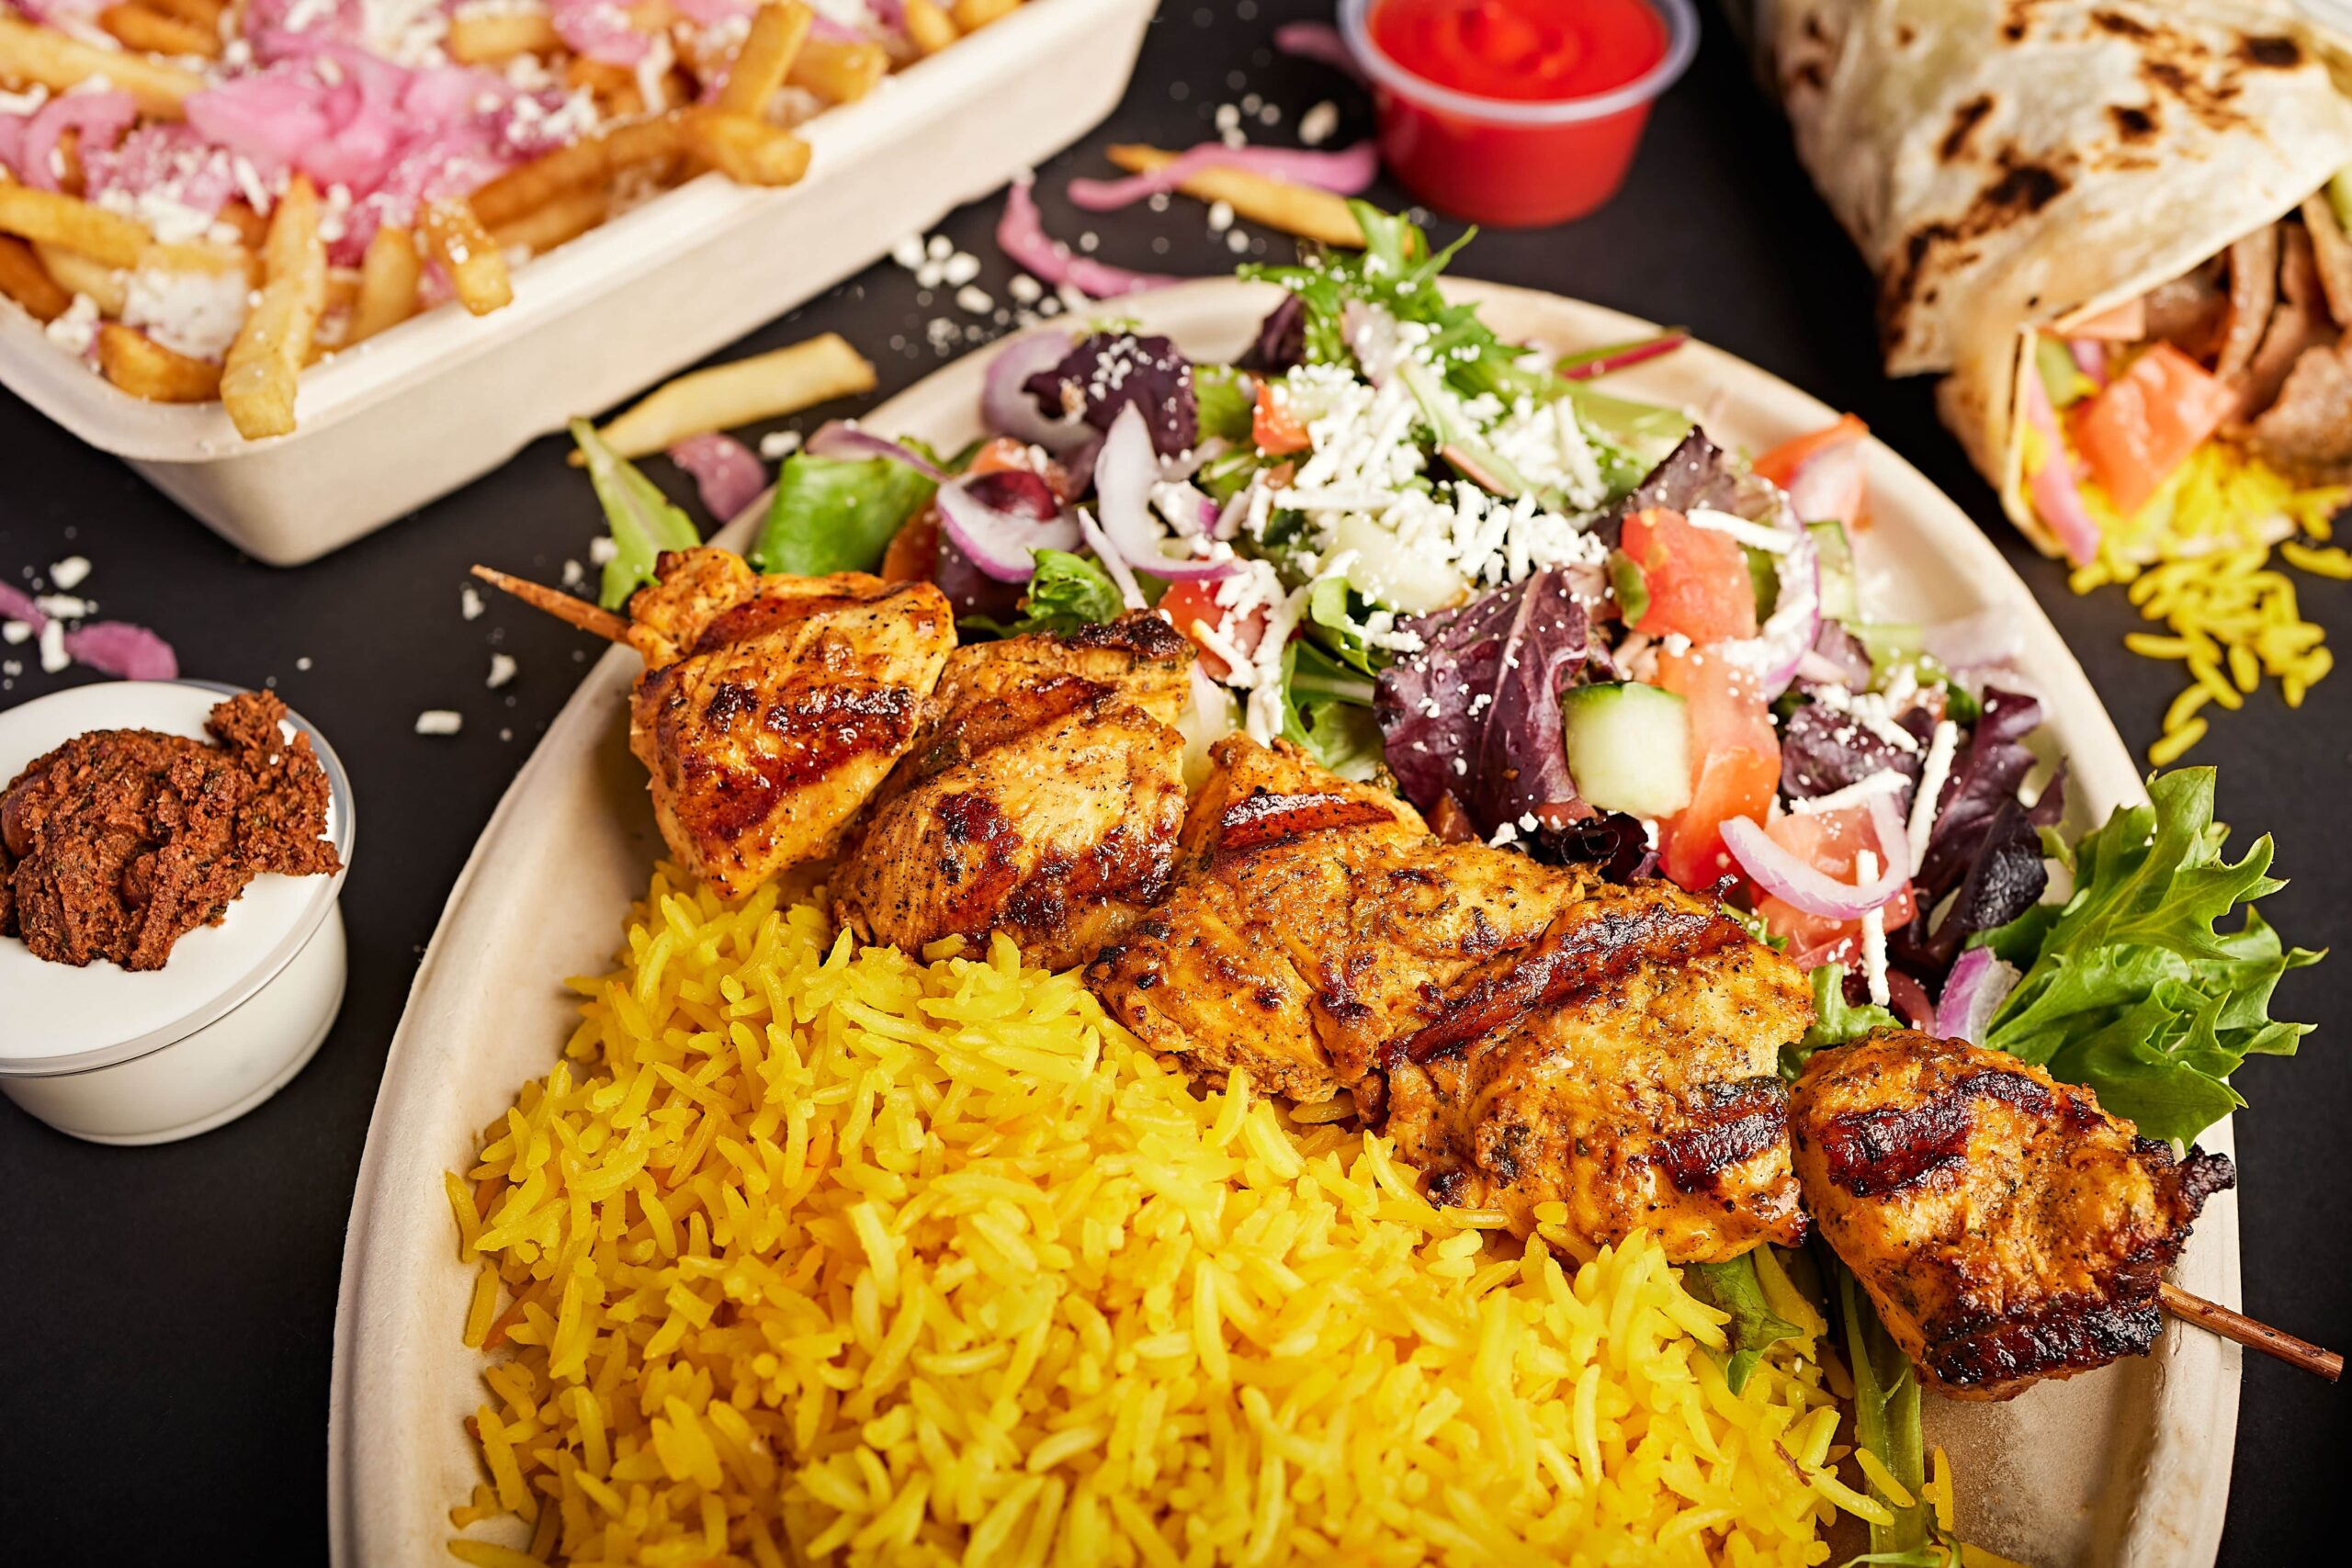 SoCal-based, fast-casual Mediterranean eatery The Kebab Shop is now open in El Segundo. The menu features bites like the customizable, refreshing Plates atop fragrant Saffron Rice.